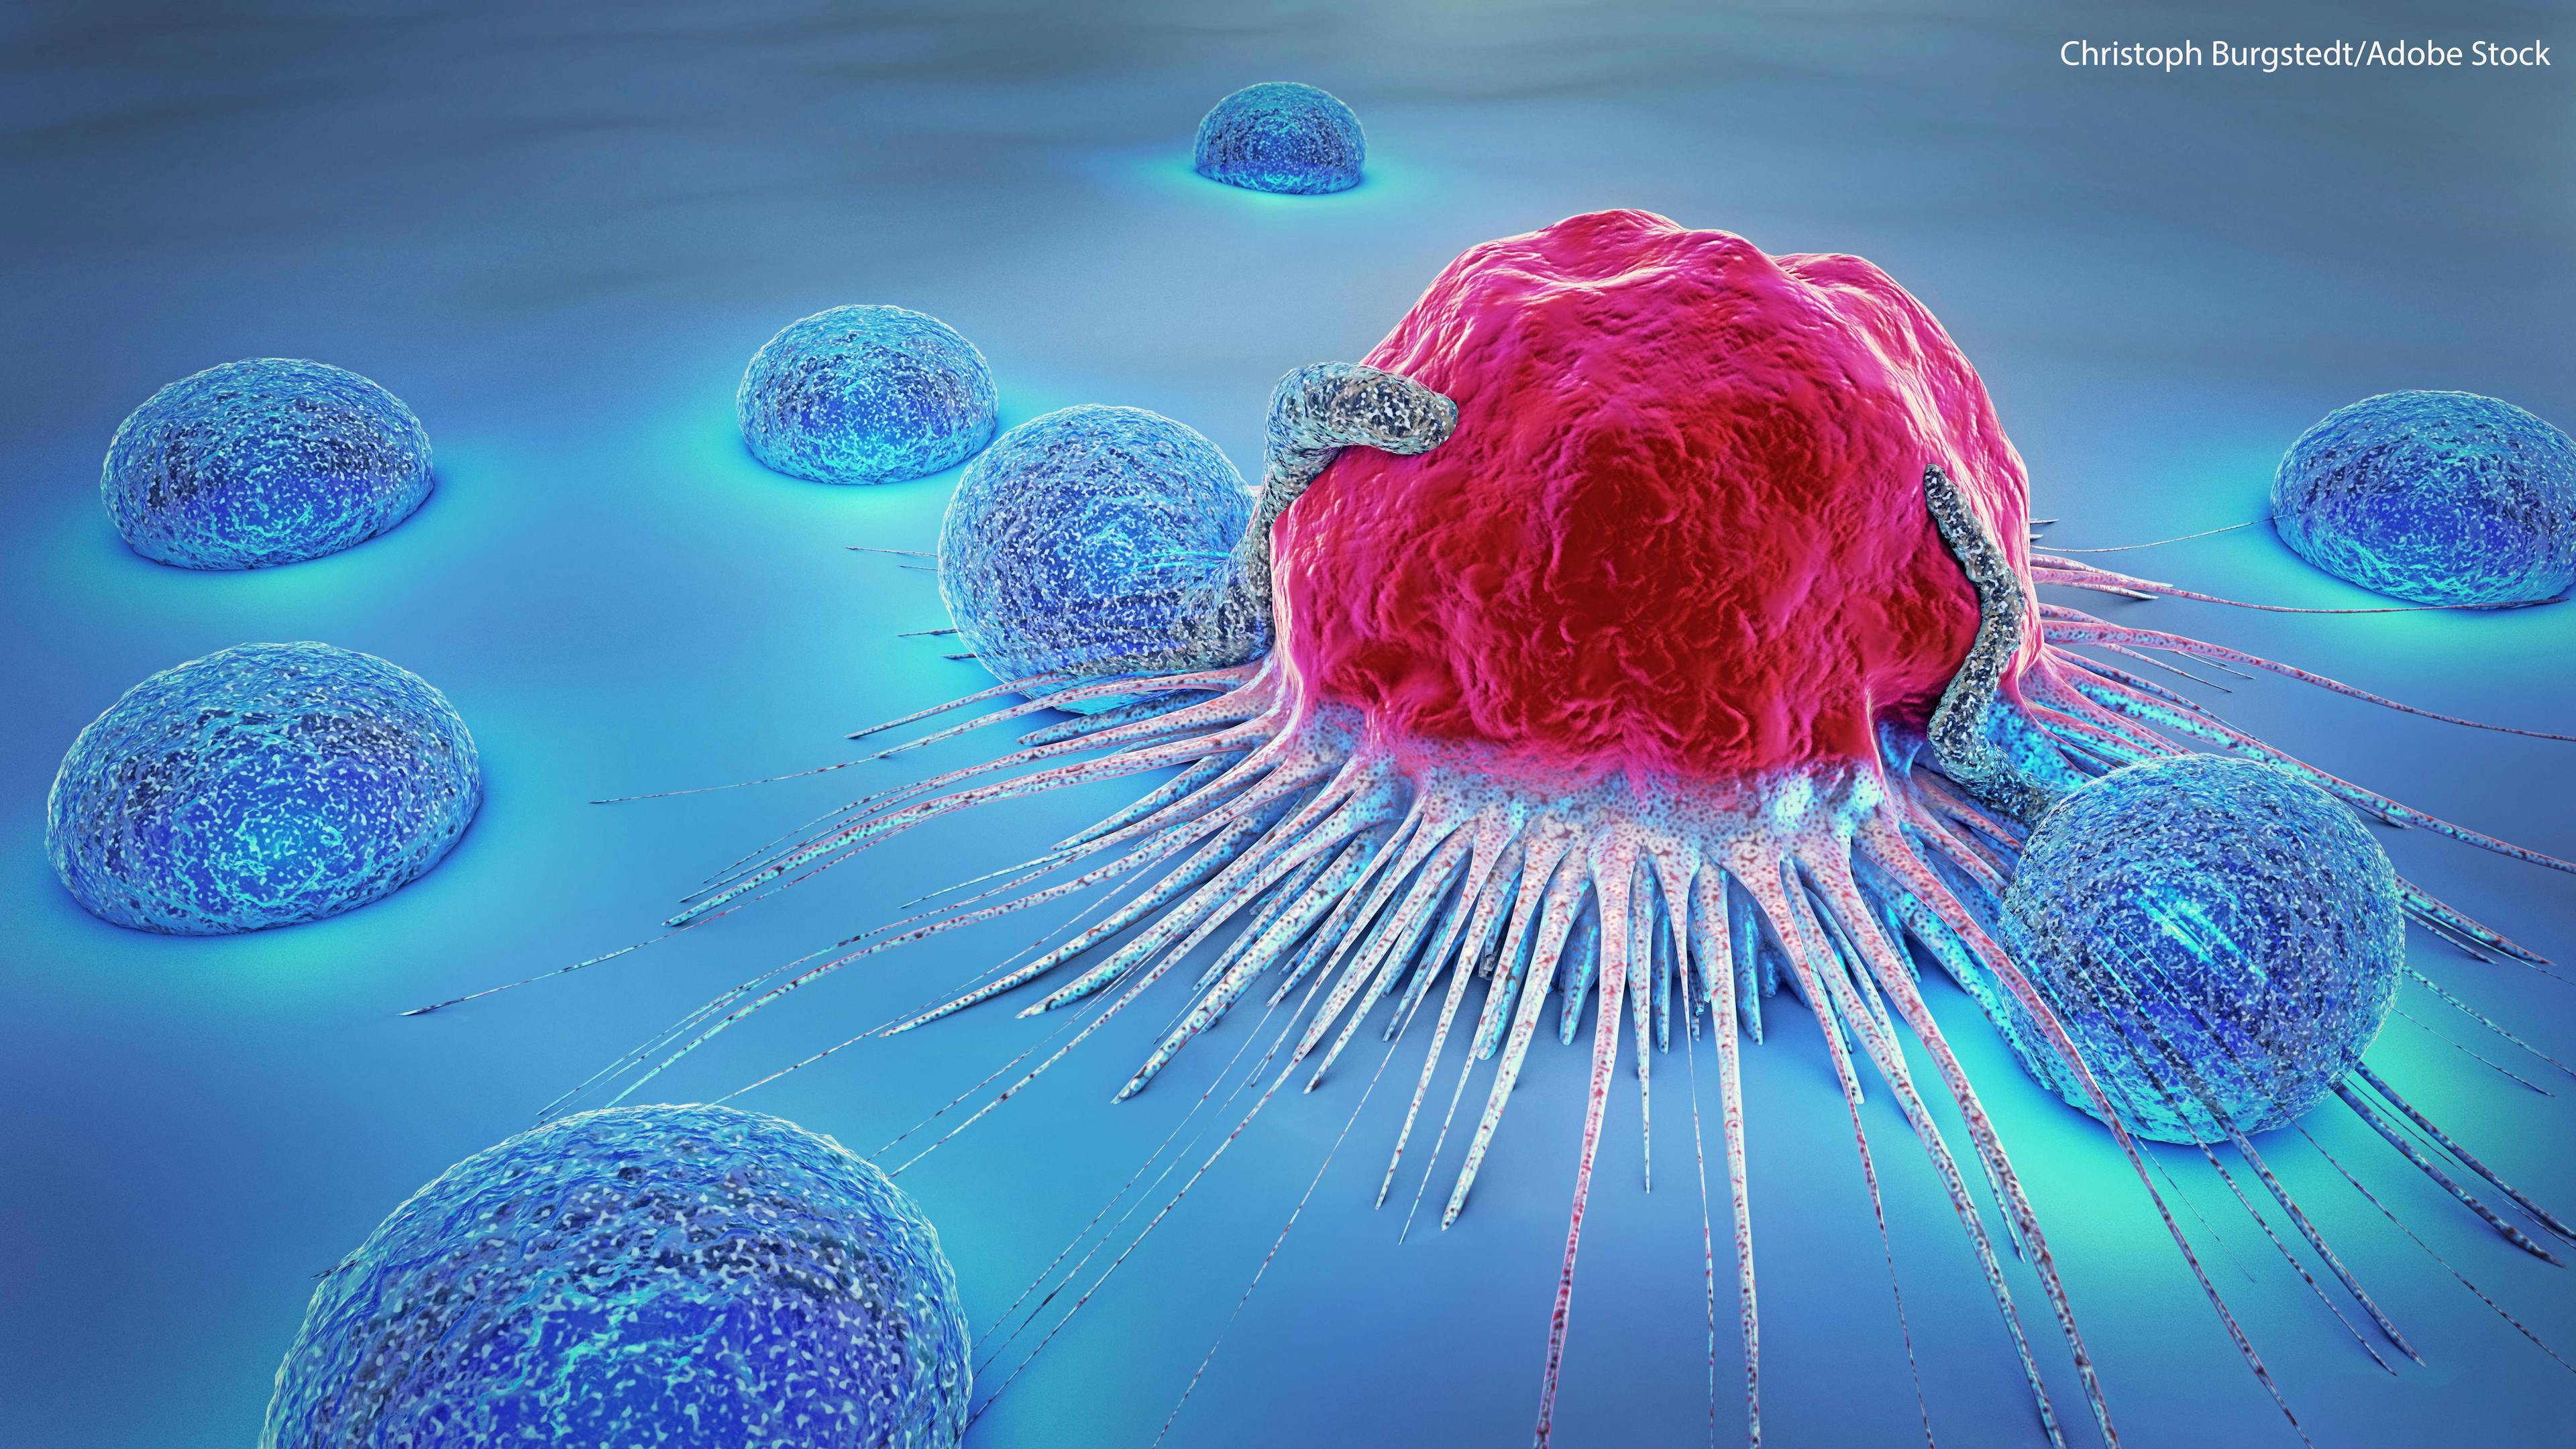 Adagrasib Shows Meaningful Activity in KRAS G12C–Mutated Solid Tumors | Image Credit: © Christoph Burgstedt - stock.adobe.com.